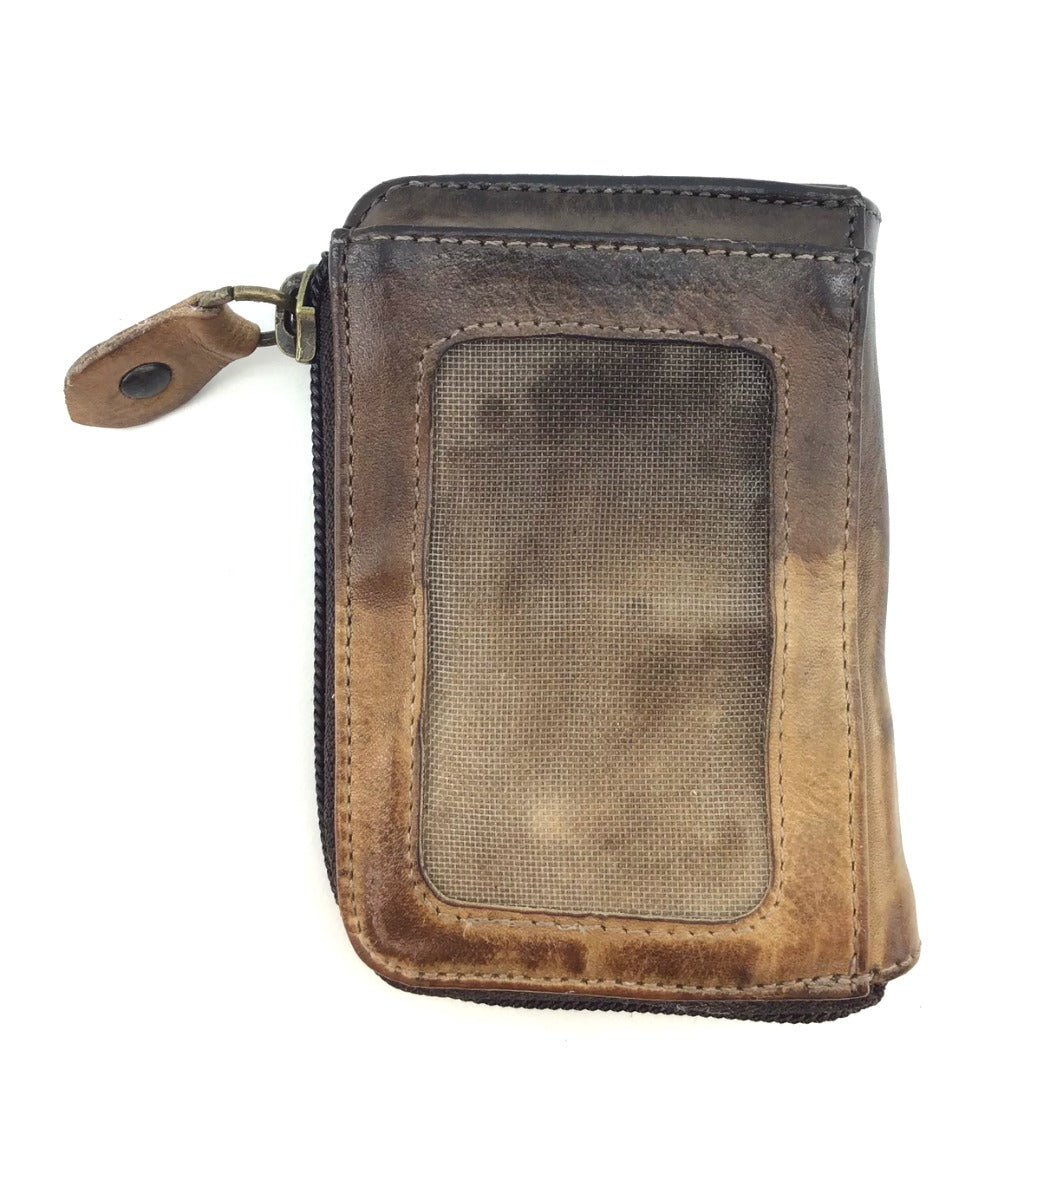 A brown leather Carrie wallet by Bed Stu on a white background.